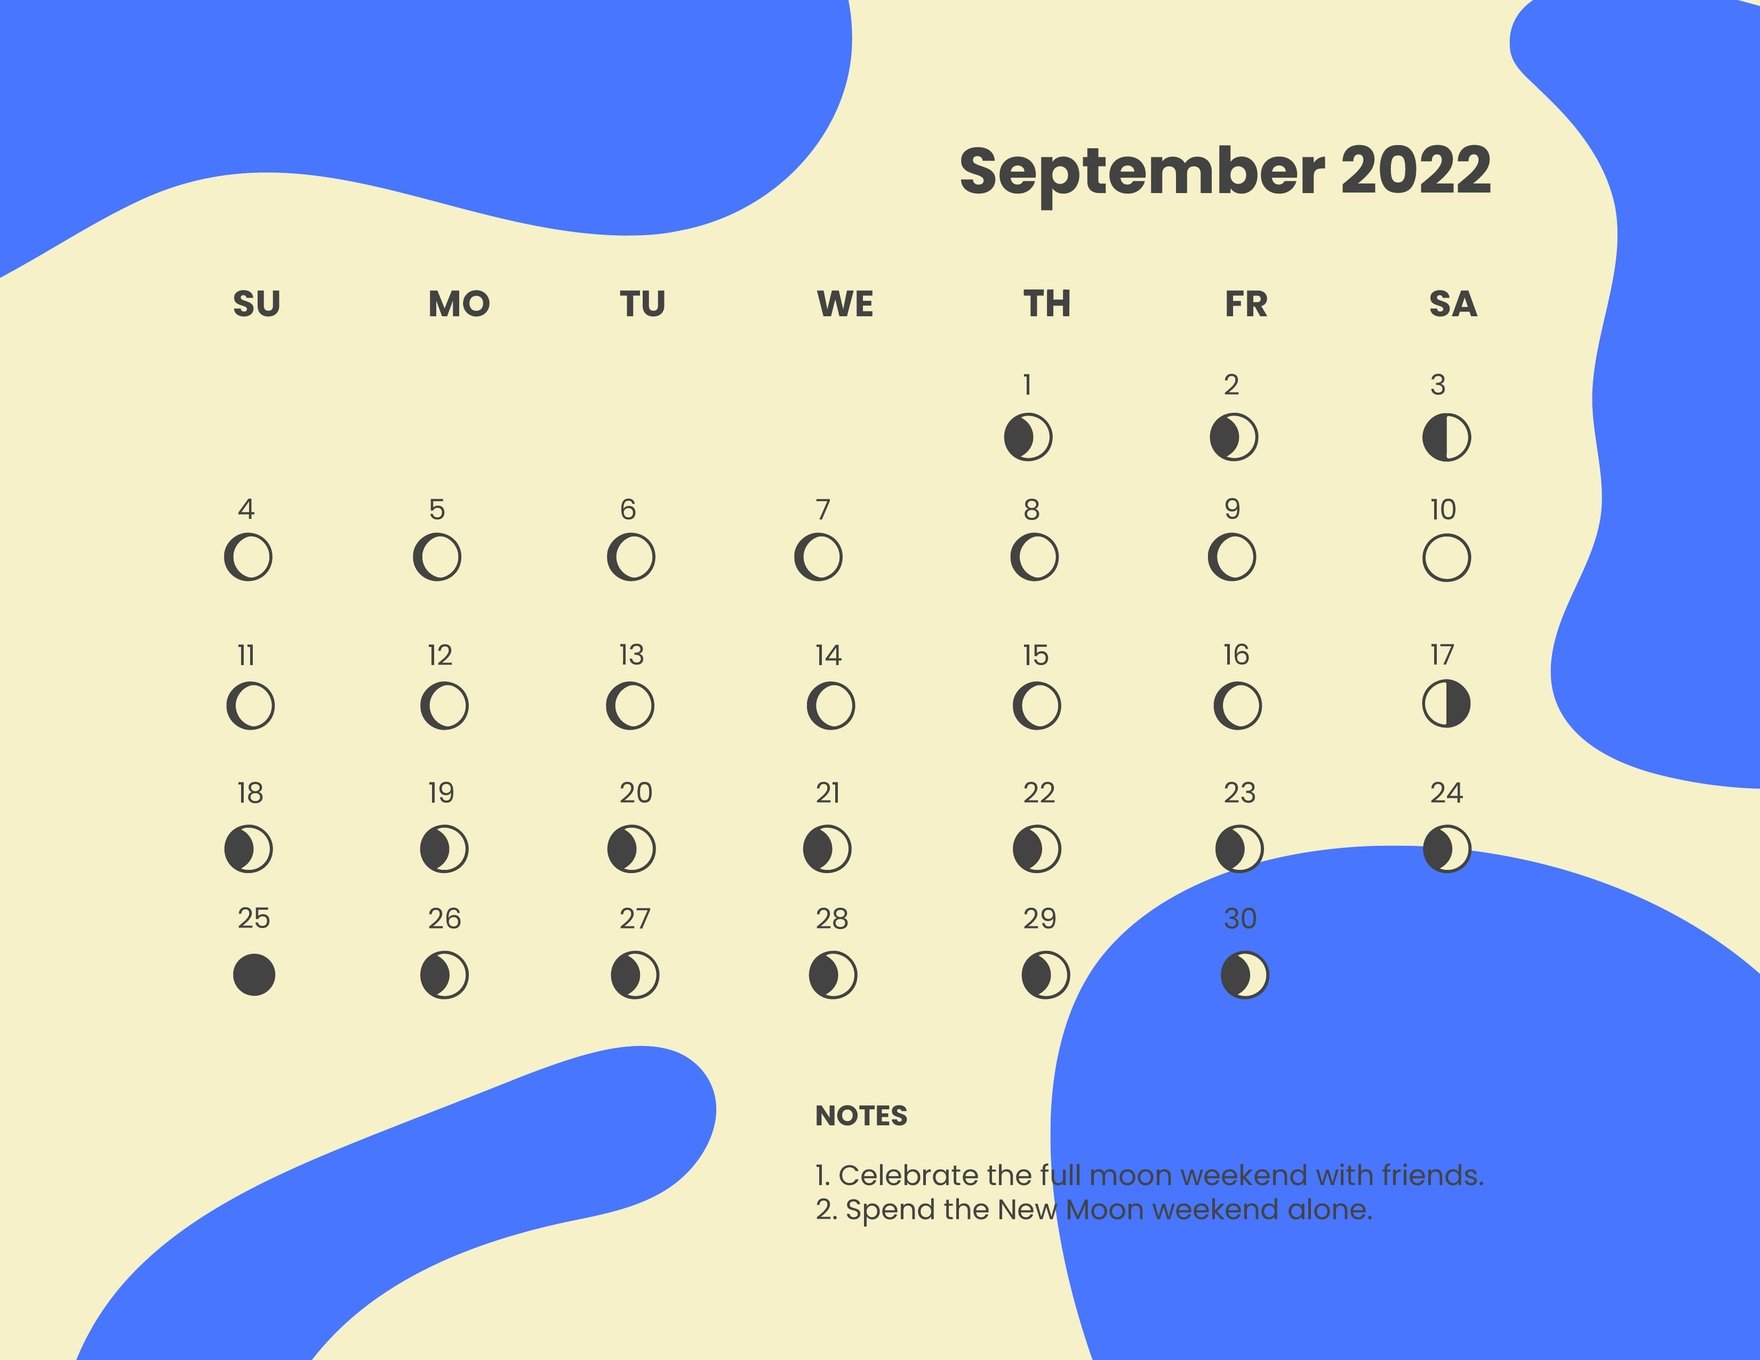 May 2023 Calendar Template With Moon Phases Google Docs, Illustrator